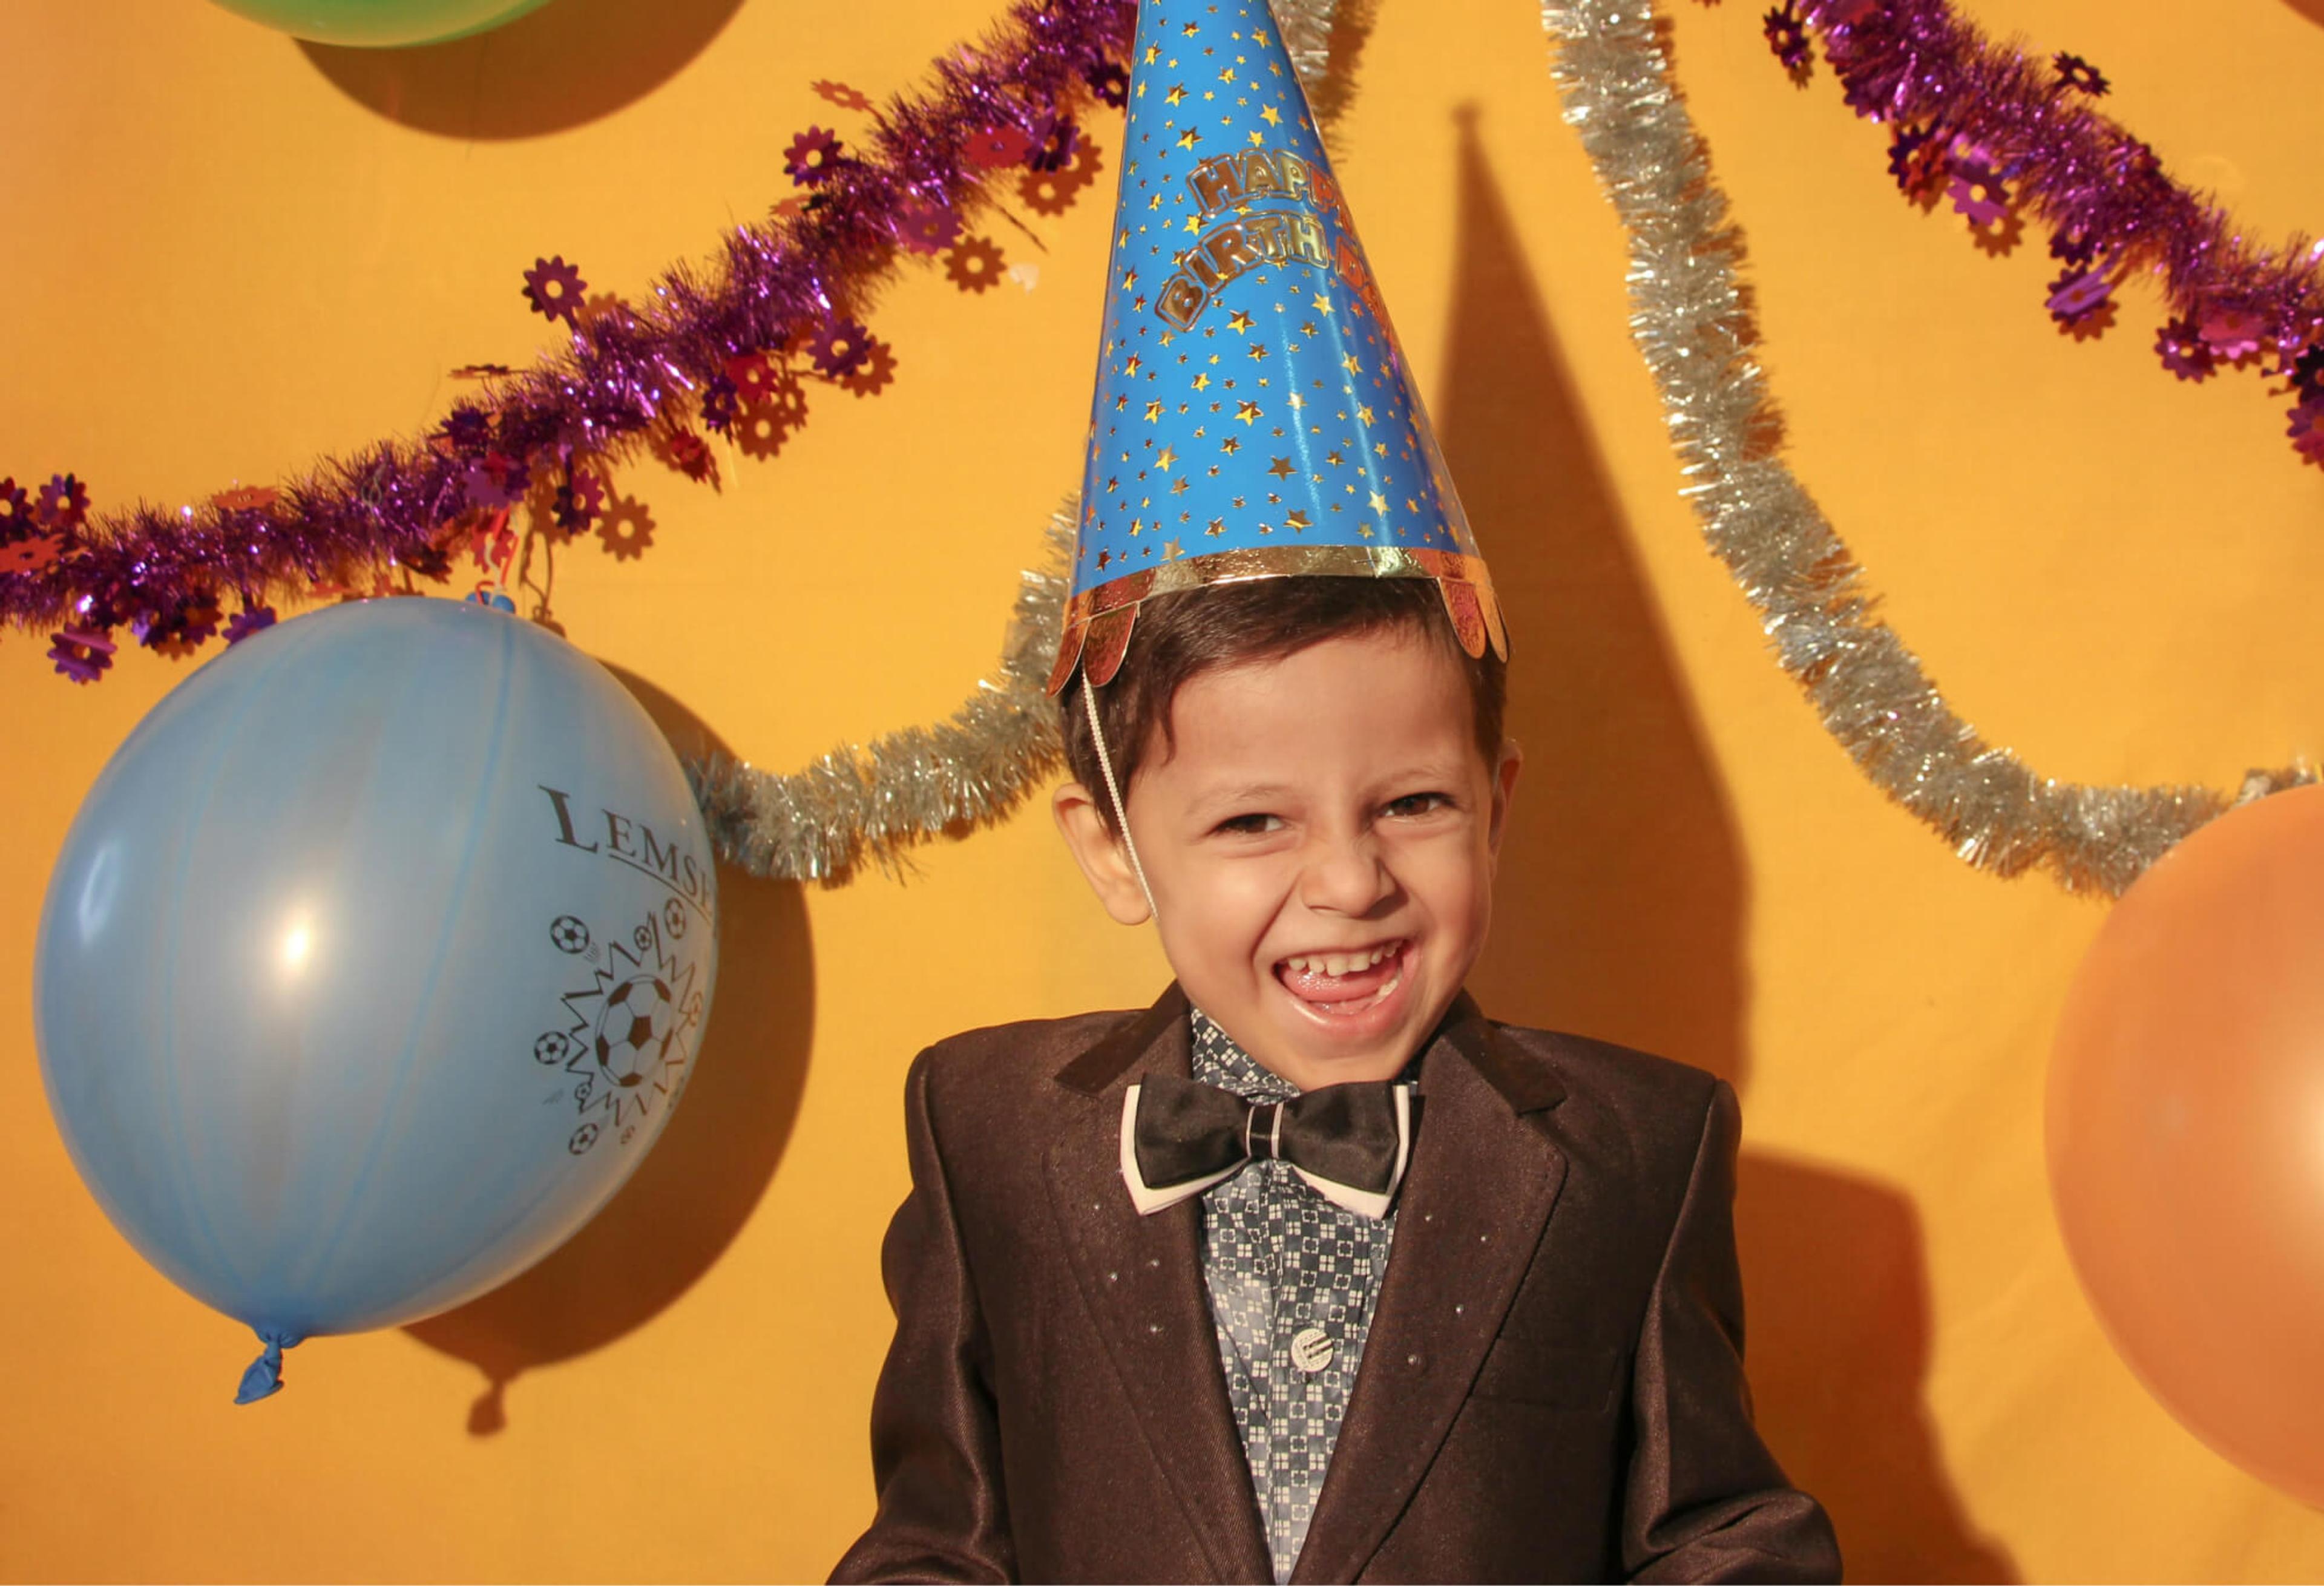 A young boy wearing a brown suit and a bow tie celebrates a birthday party.